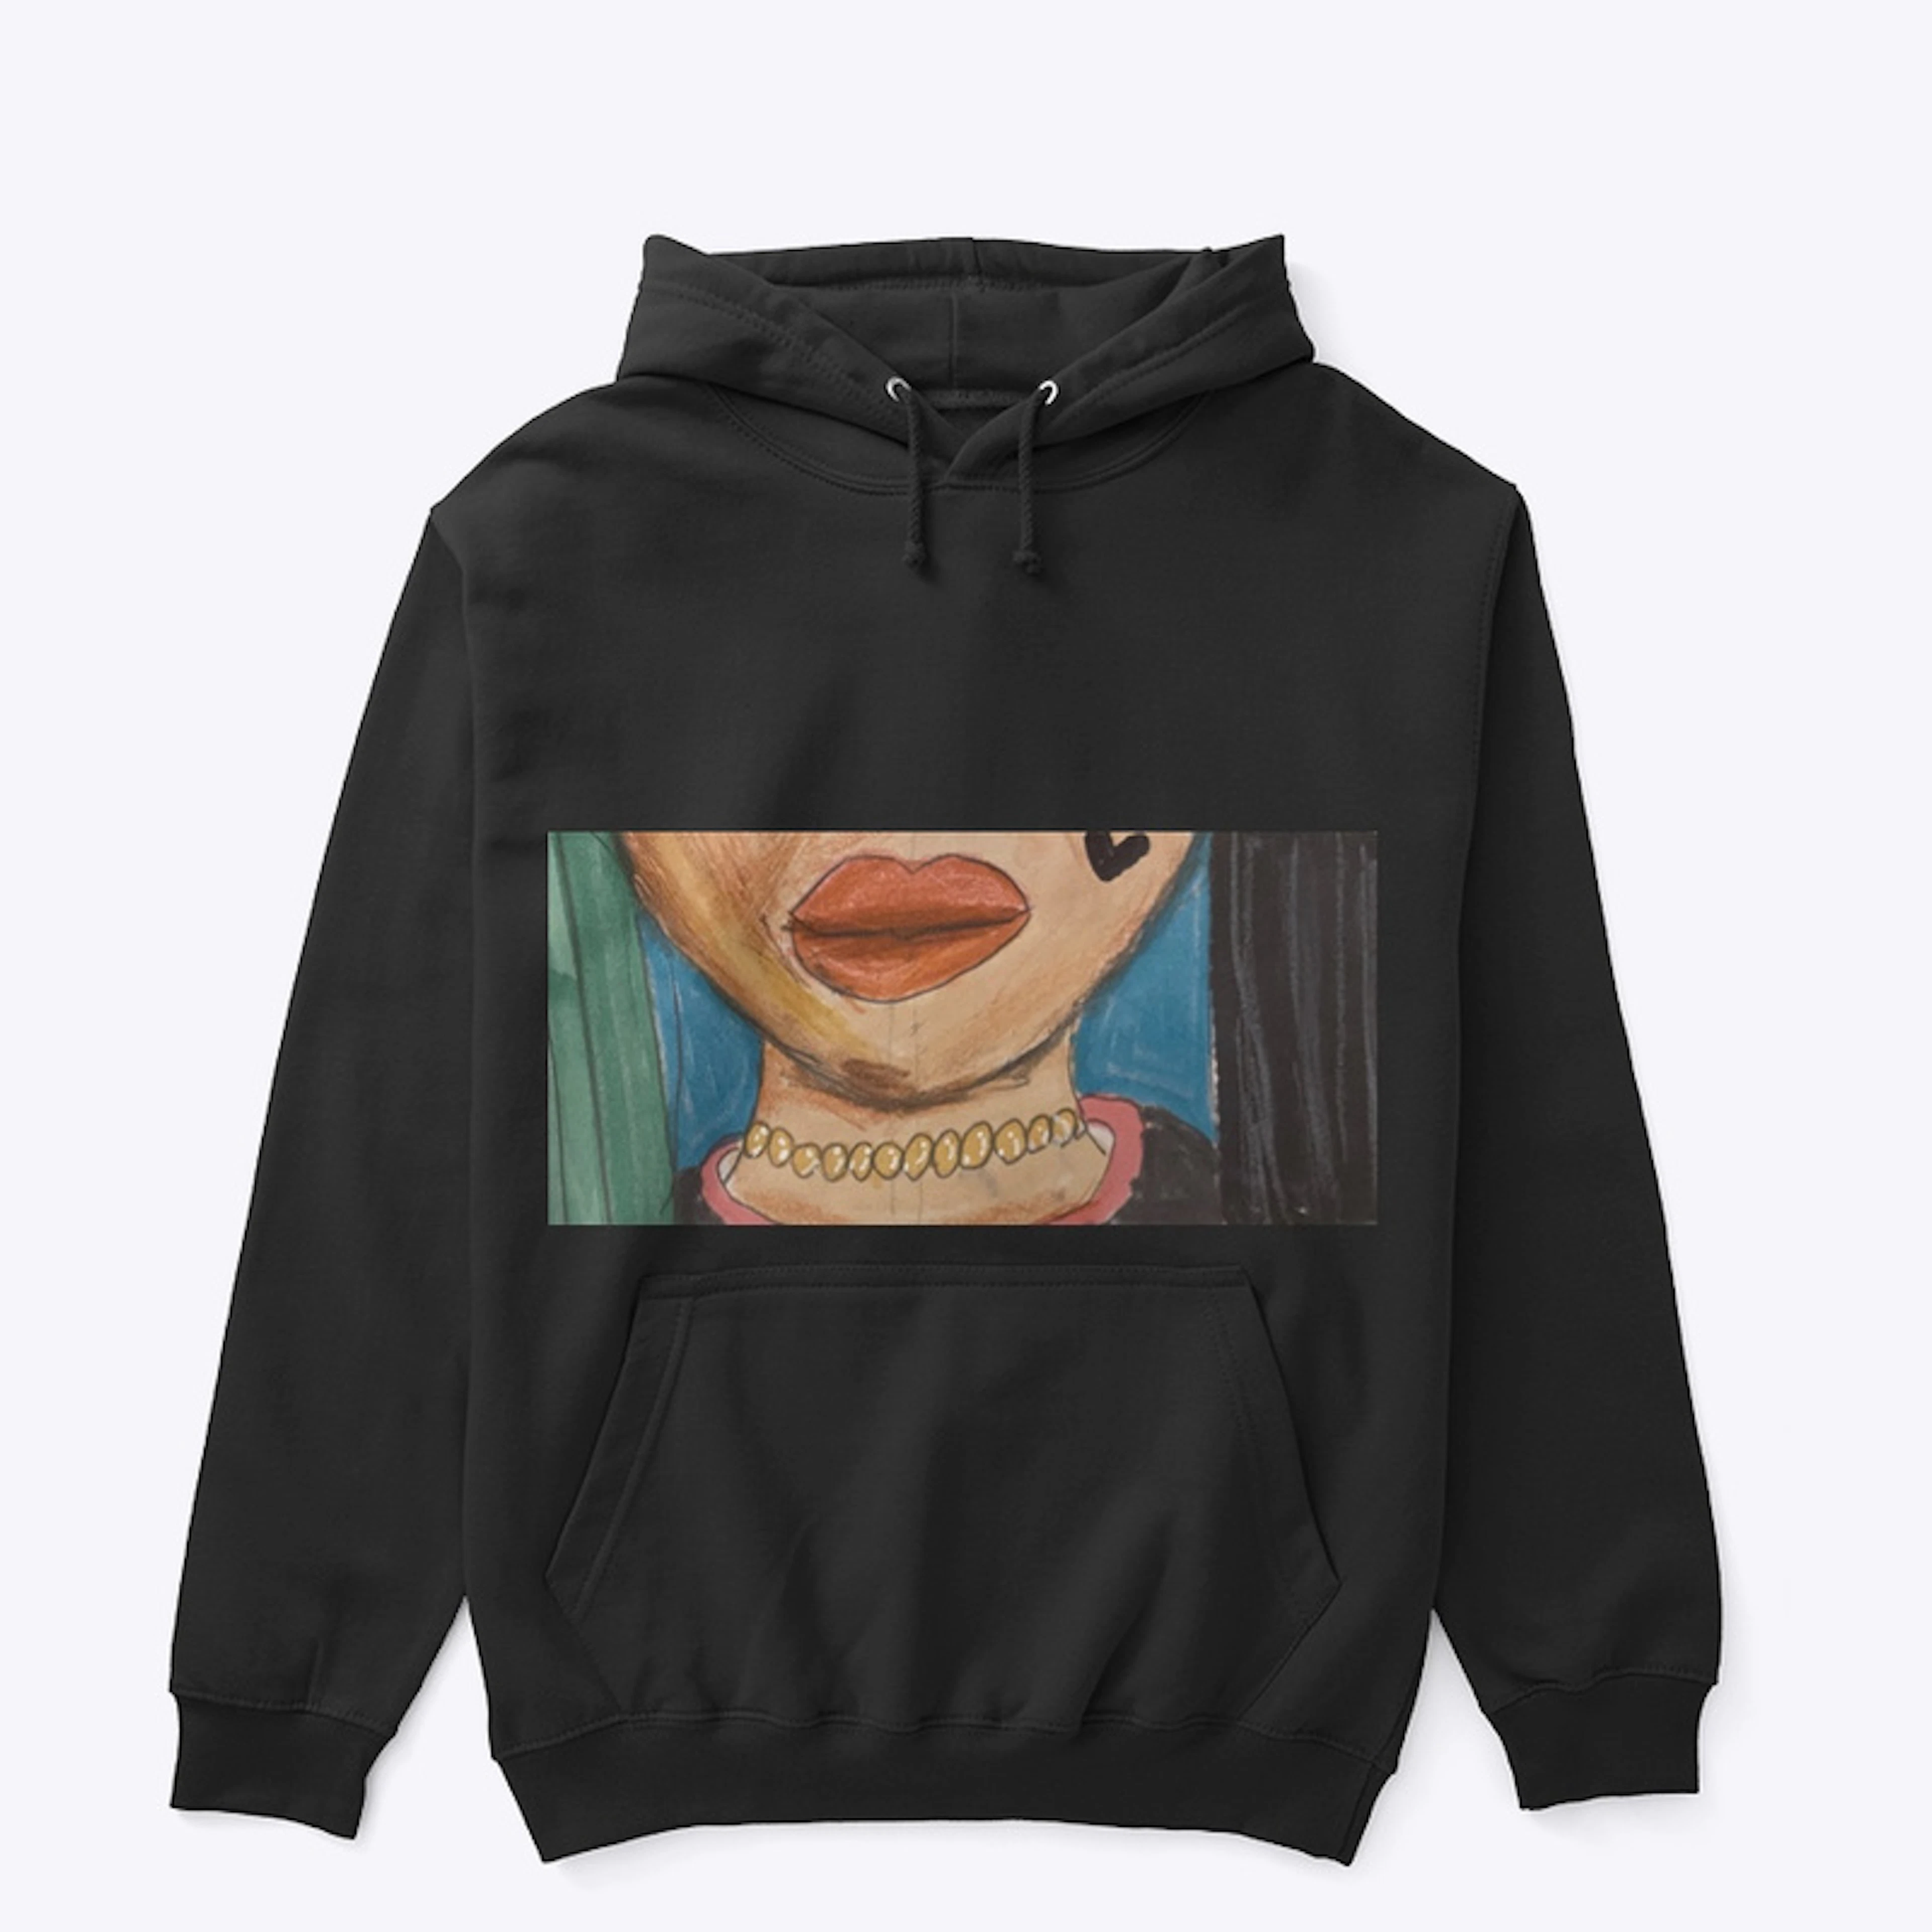 She’s Munchy Pullover Hoodie 